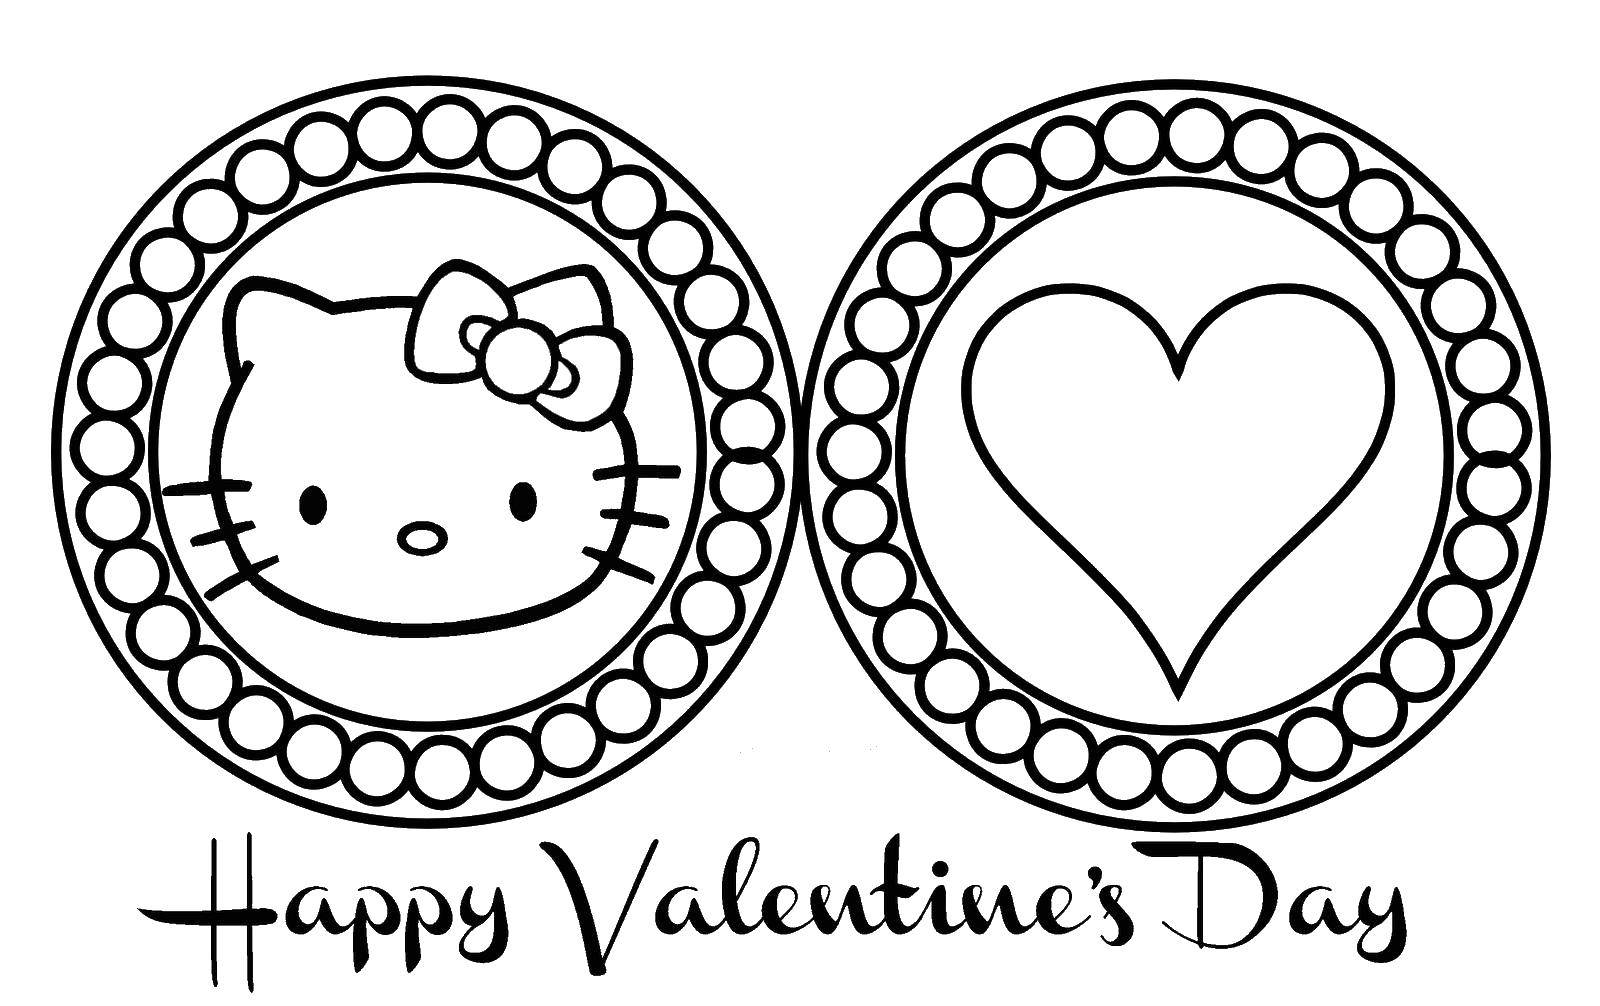 Coloring Be my Valentine. Category Valentines day. Tags:  Valentines day, love, heart.